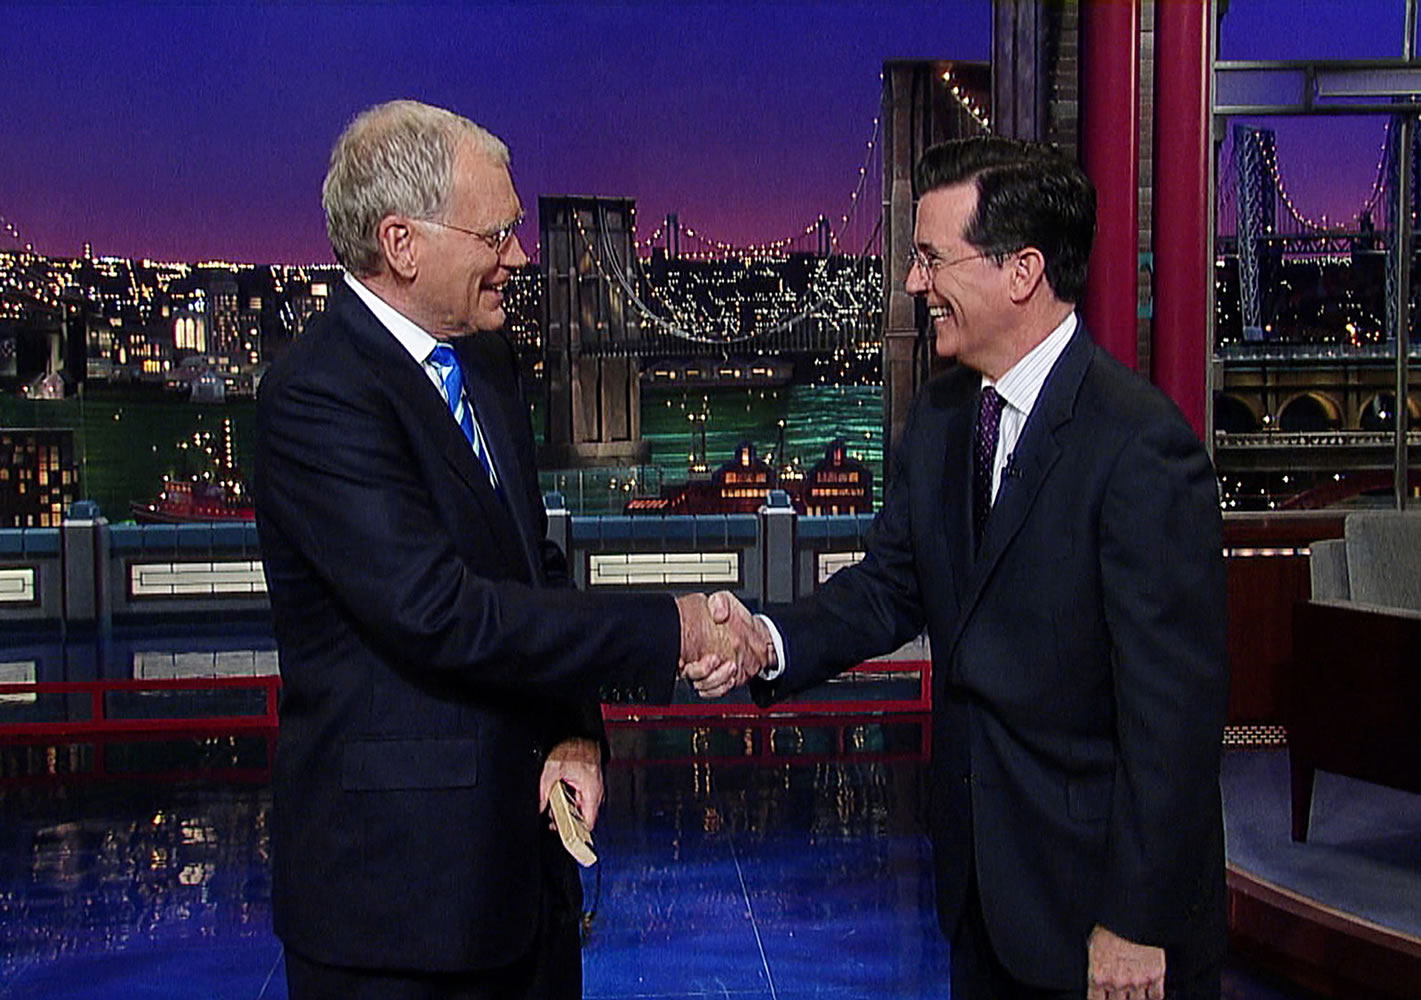 Host David Letterman, left, shaking hands with fellow talk show host Stephen Colbert of &quot;The Colbert Report,&quot; during a surprise visit in 2011 on the &quot;Late Show with David Letterman,&quot; in New York.